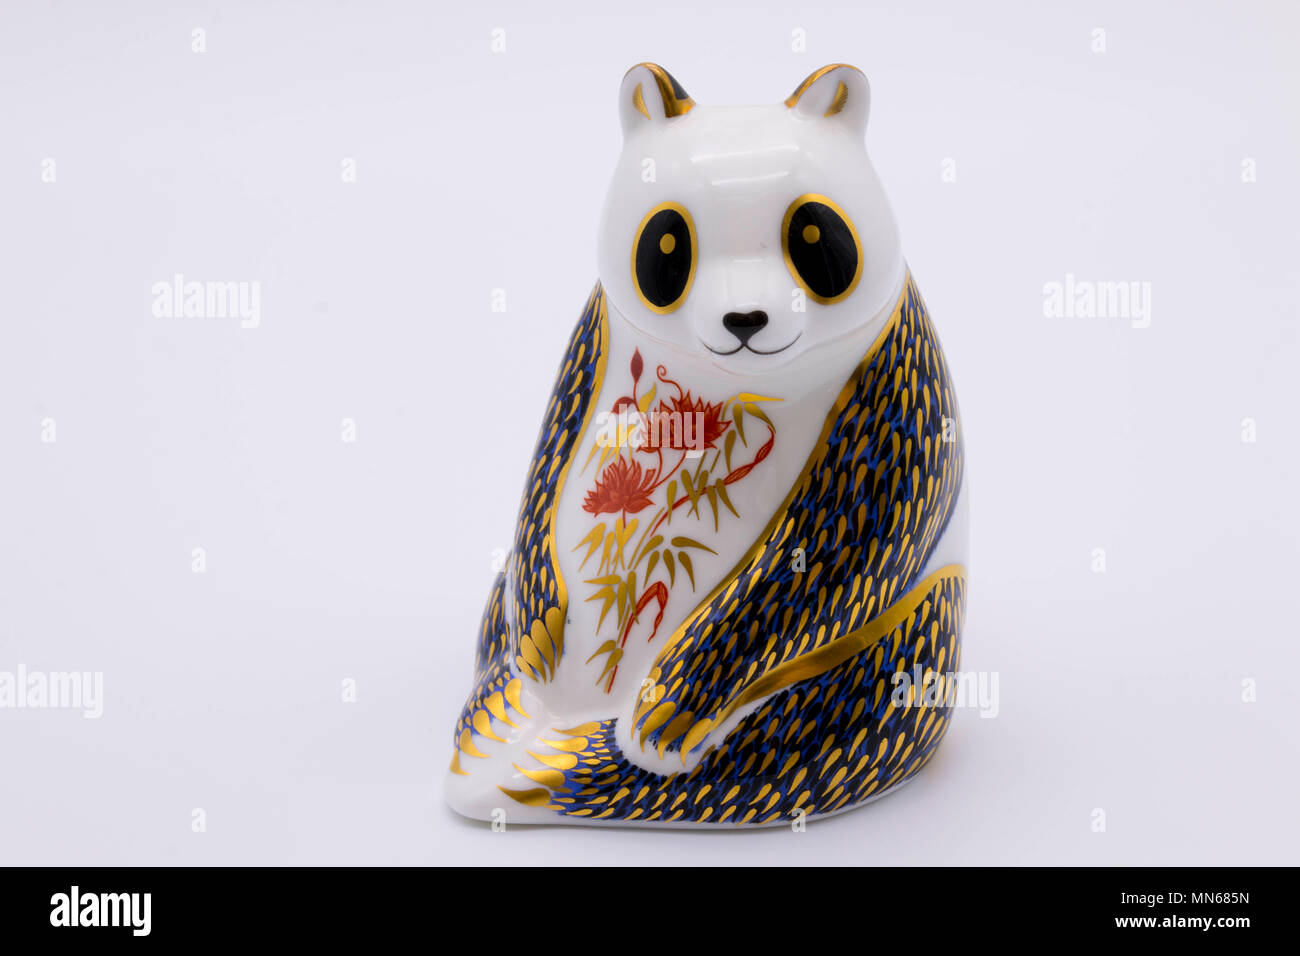 Royal Crown Derby bone china paperweight of a giant panda uk Stock Photo